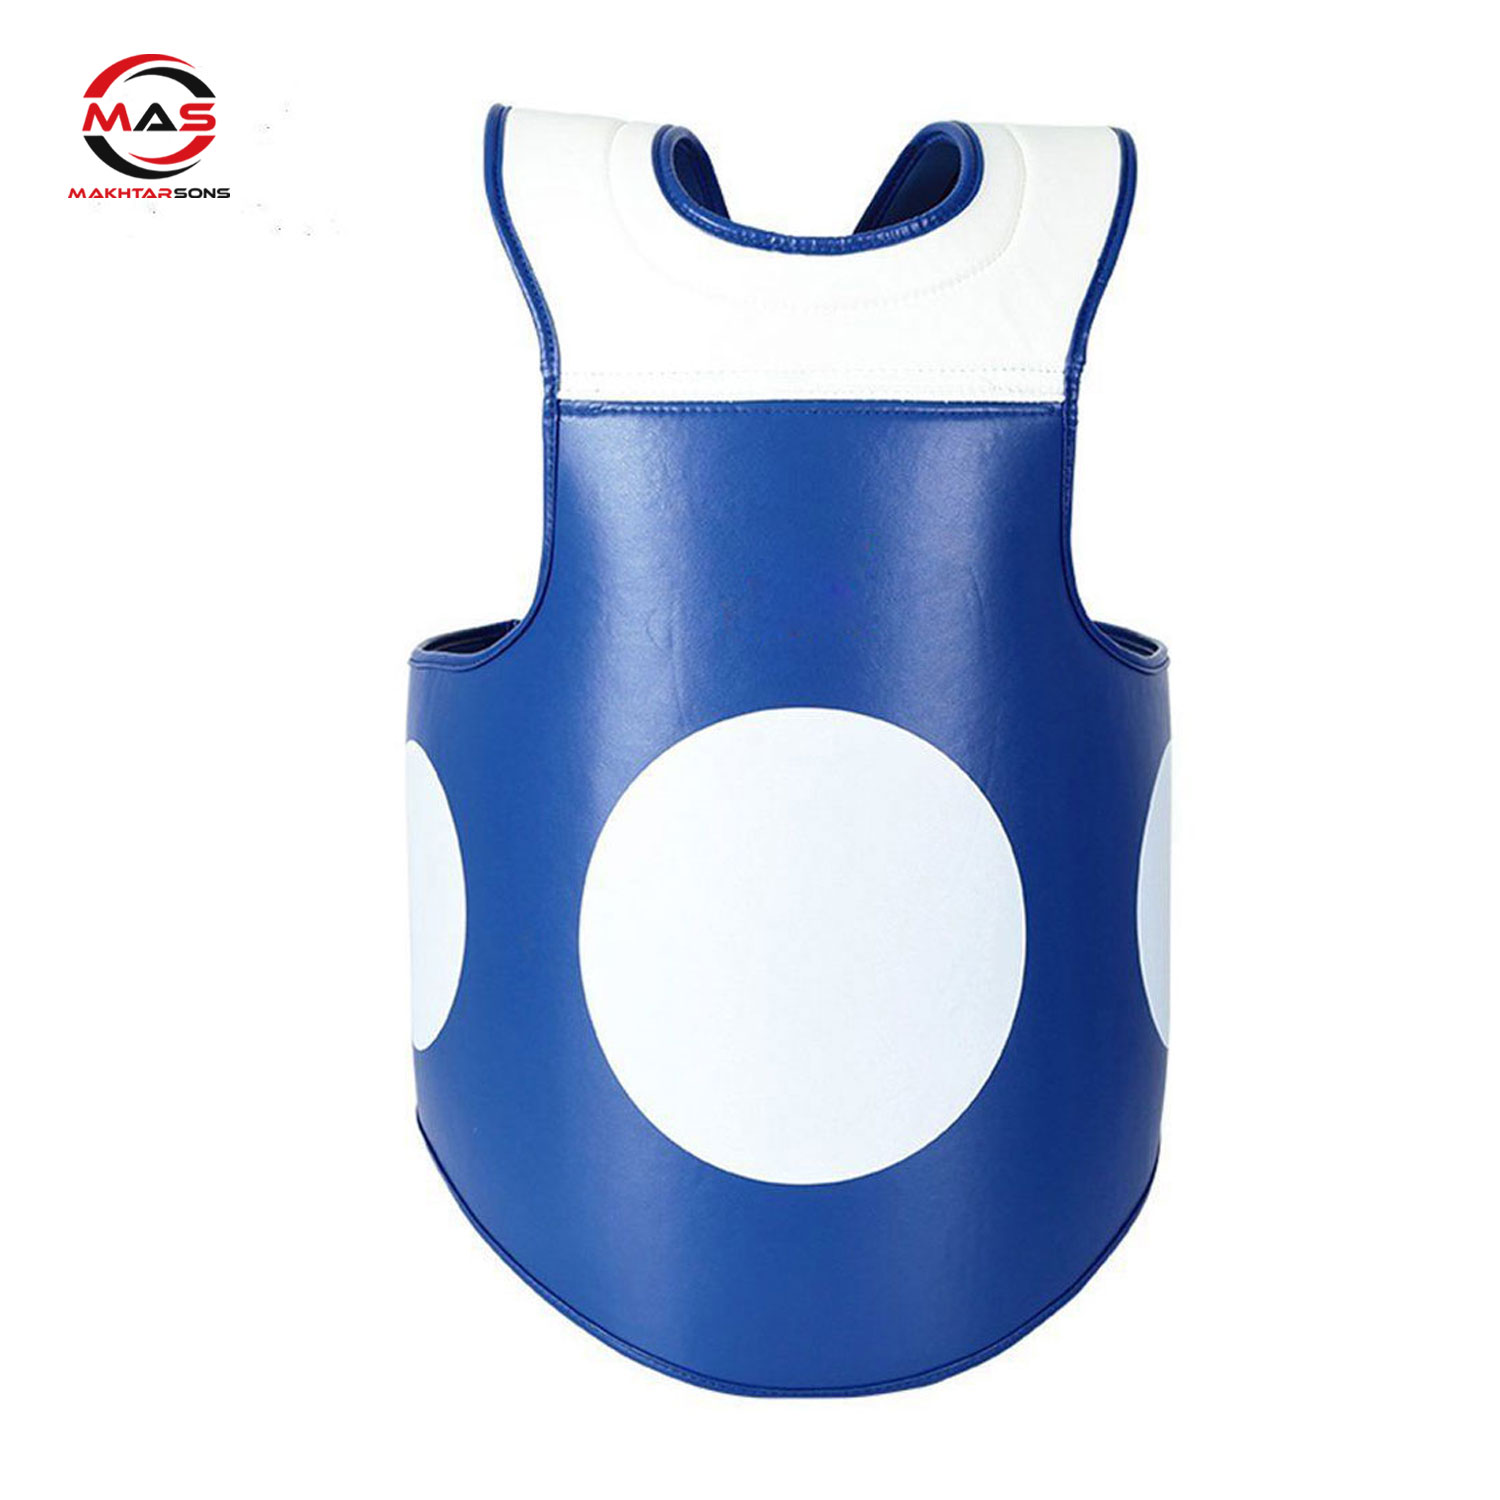 BODY CHEST PROTECTOR | MAS 282